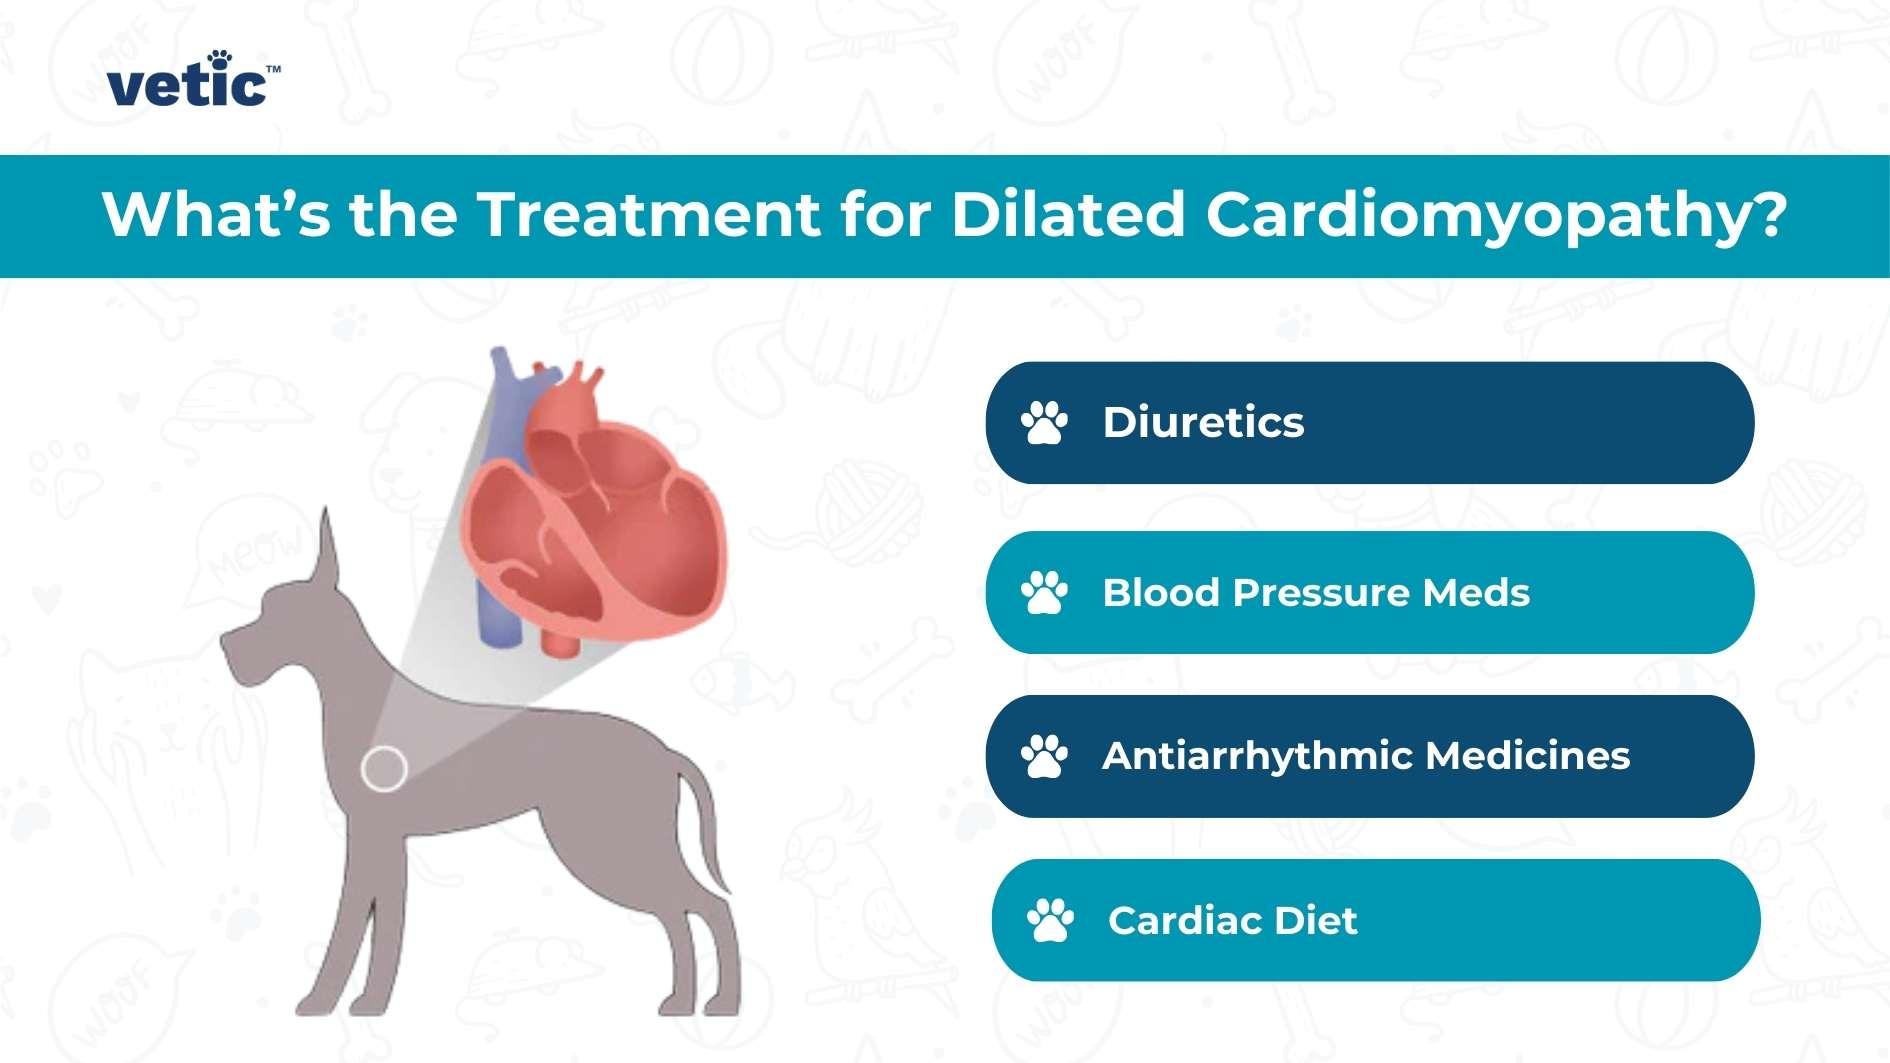 The image contains the logo of “vetic” at the top left corner and a question, “What’s the Treatment for Dilated Cardiomyopathy?” Below this text, there is an illustration of a dog with an oversized human heart superimposed on its body. To the right, there are four treatment options listed: “Diuretics,” “Blood Pressure Meds,” “Antiarrhythmic Medicines,” and “Cardiac Diet.” Each option is accompanied by a paw print icon.